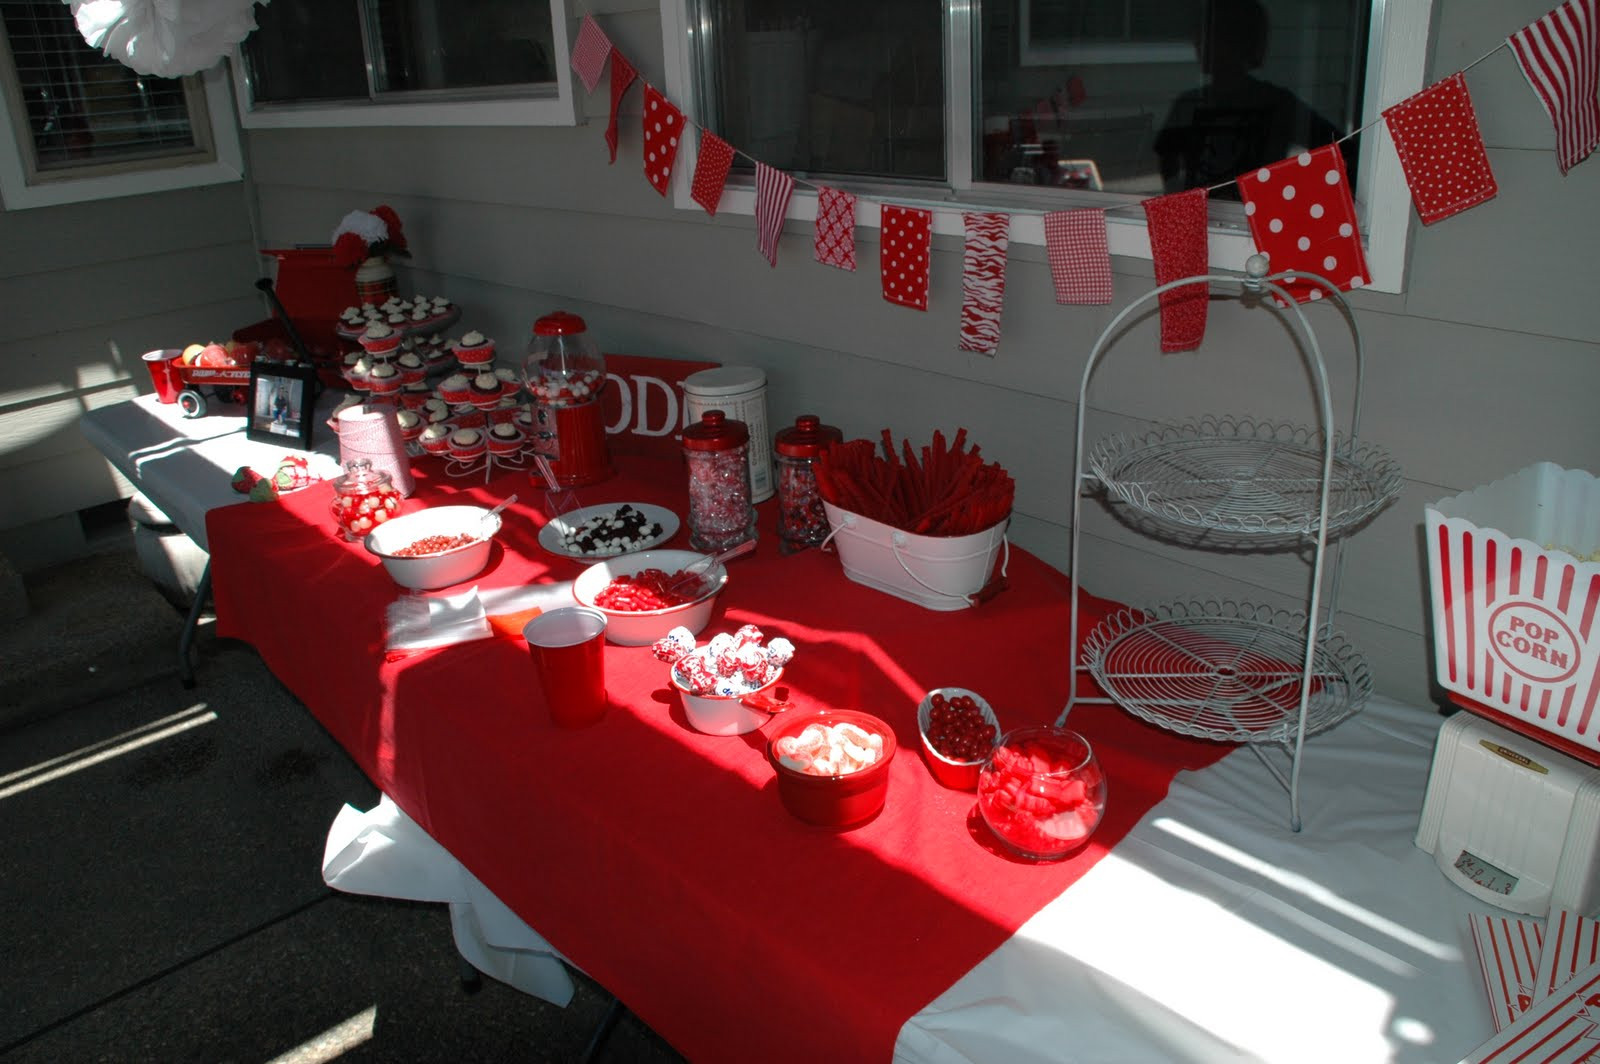 Red White And Black Graduation Party Ideas
 Lipstick and Laundry Red and White Graduation Party